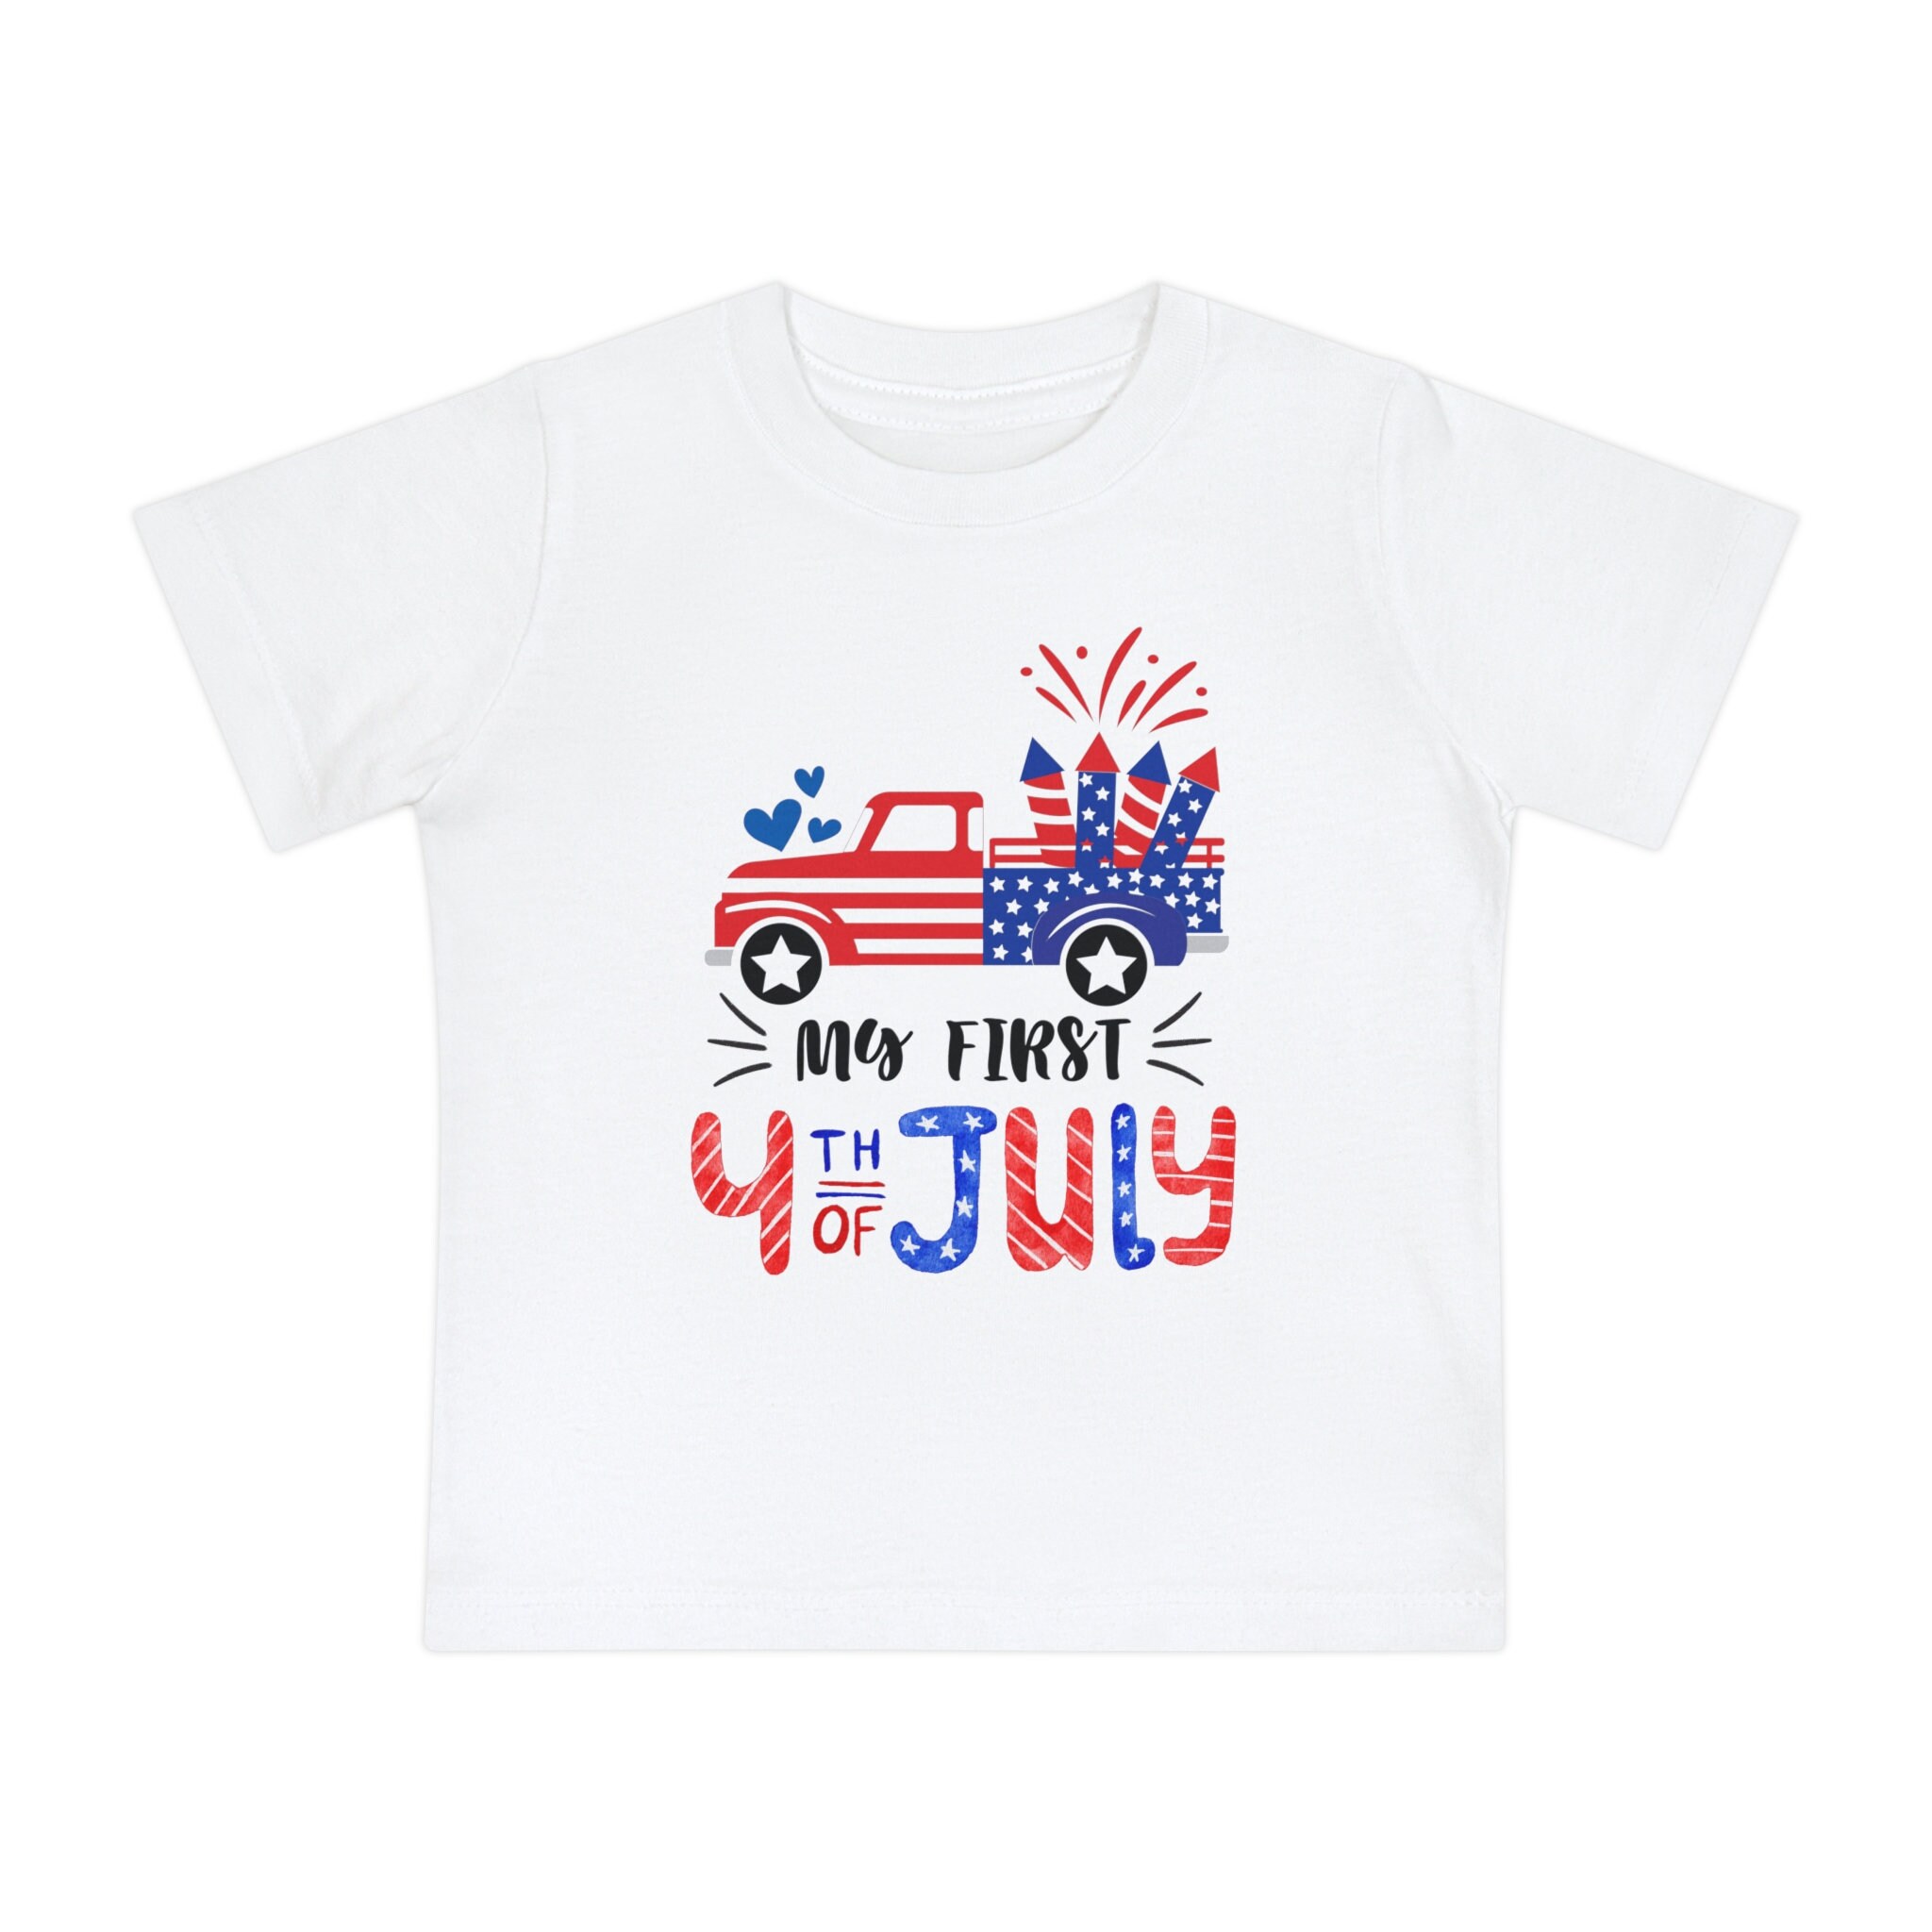 My First 4th of July Shirt and Bodysuit for Baby Toddler Boy - Etsy